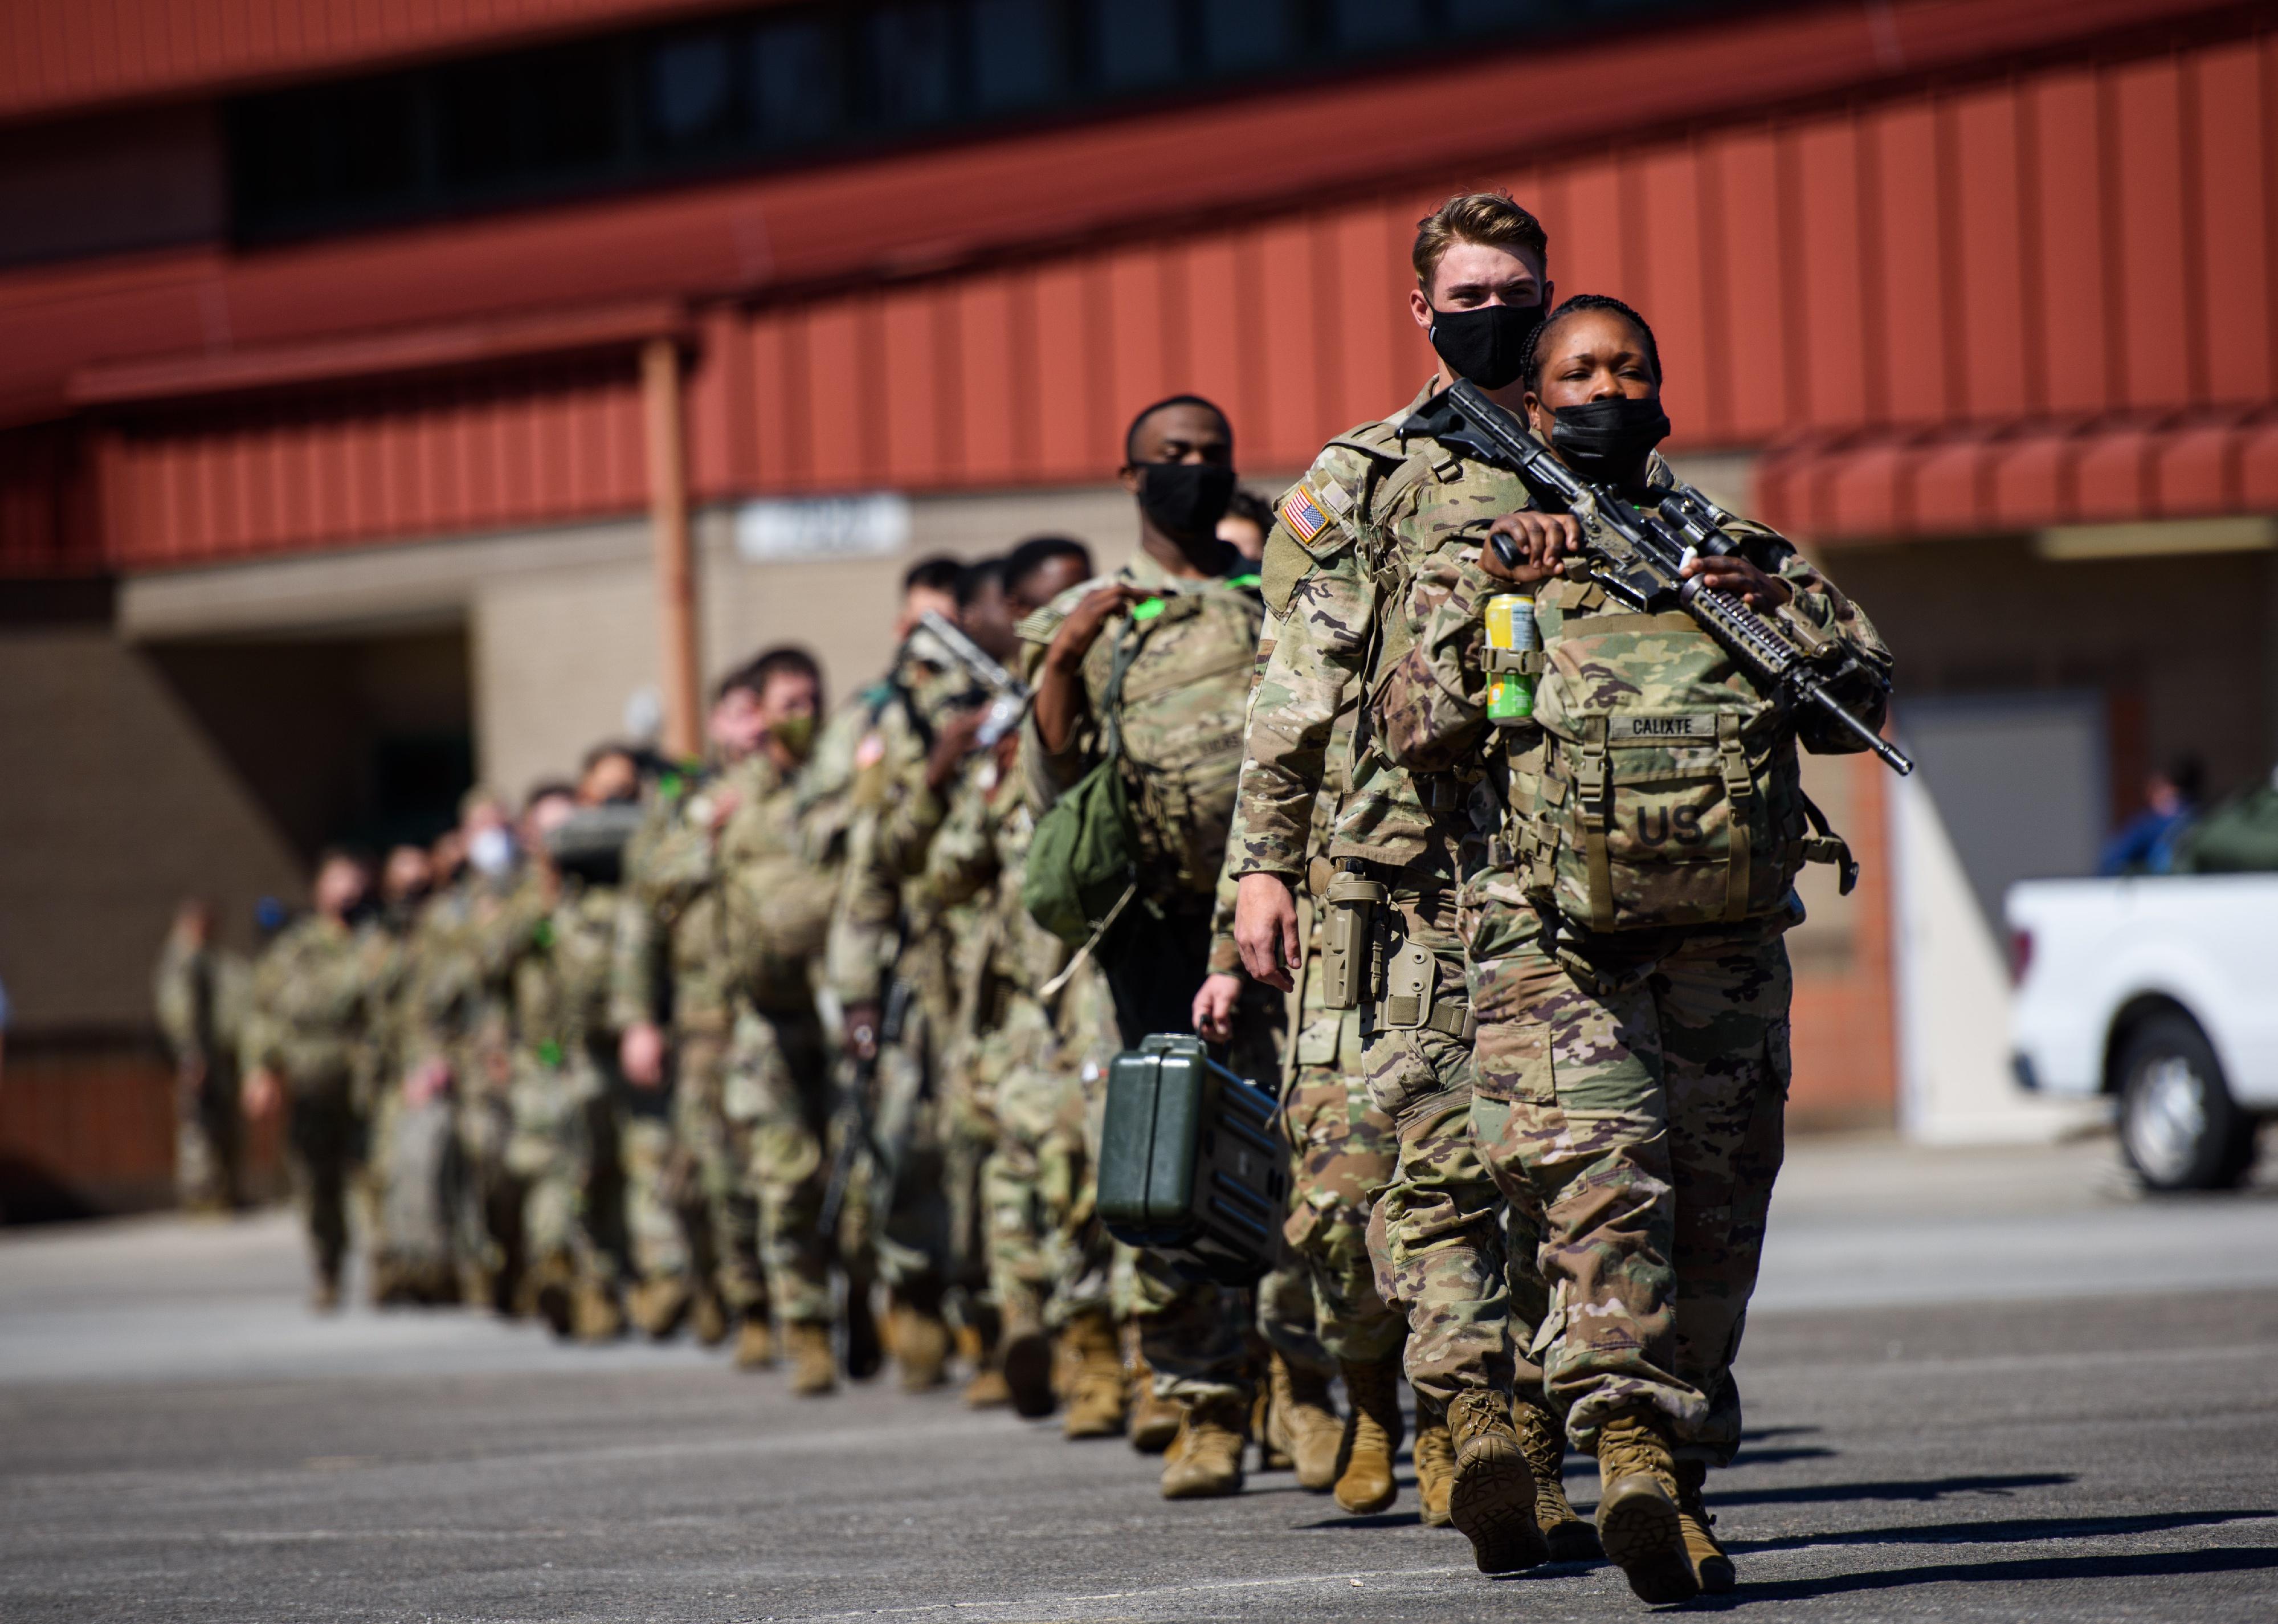 A line of active duty Army soldiers in camouflage.